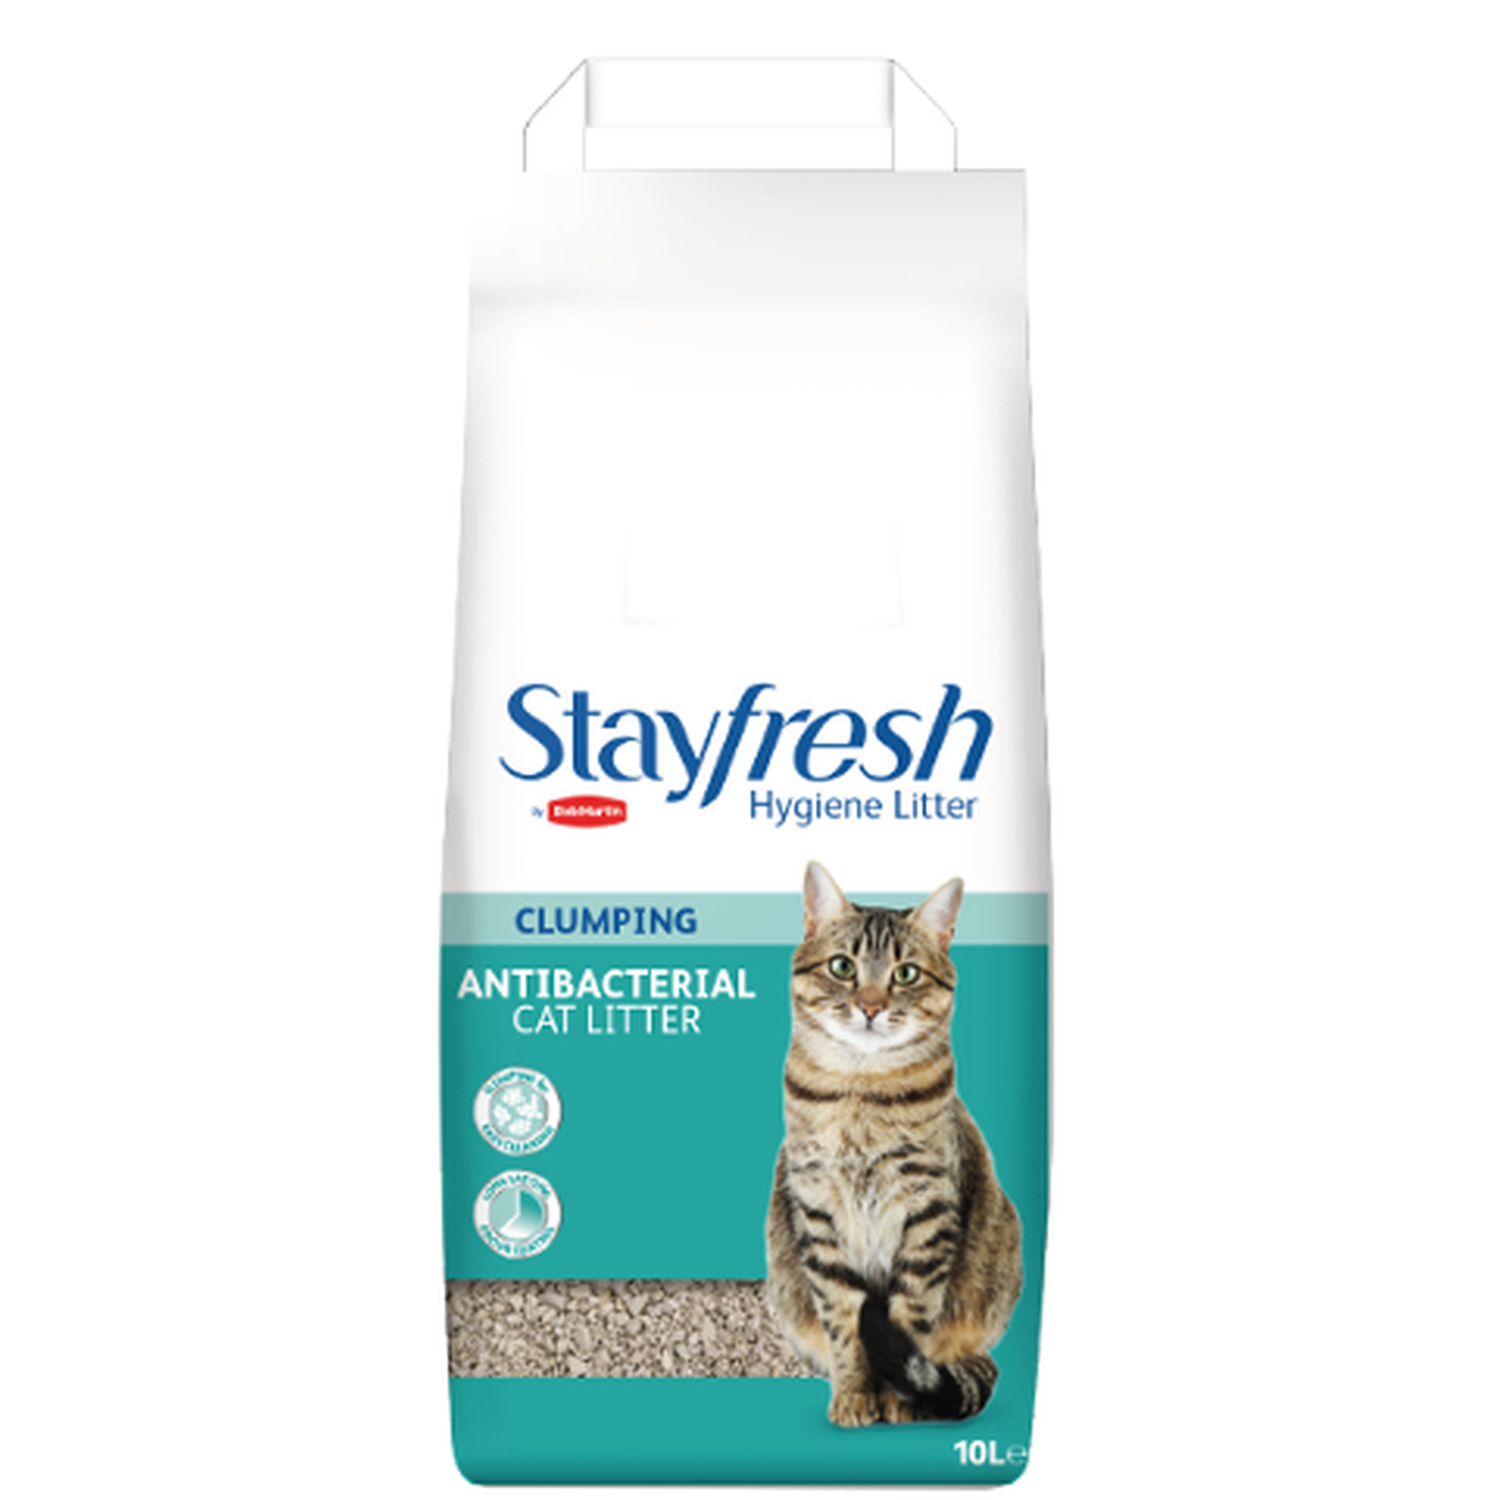 Stayfresh Clumping Antibacterial Cat Litter 10L Image